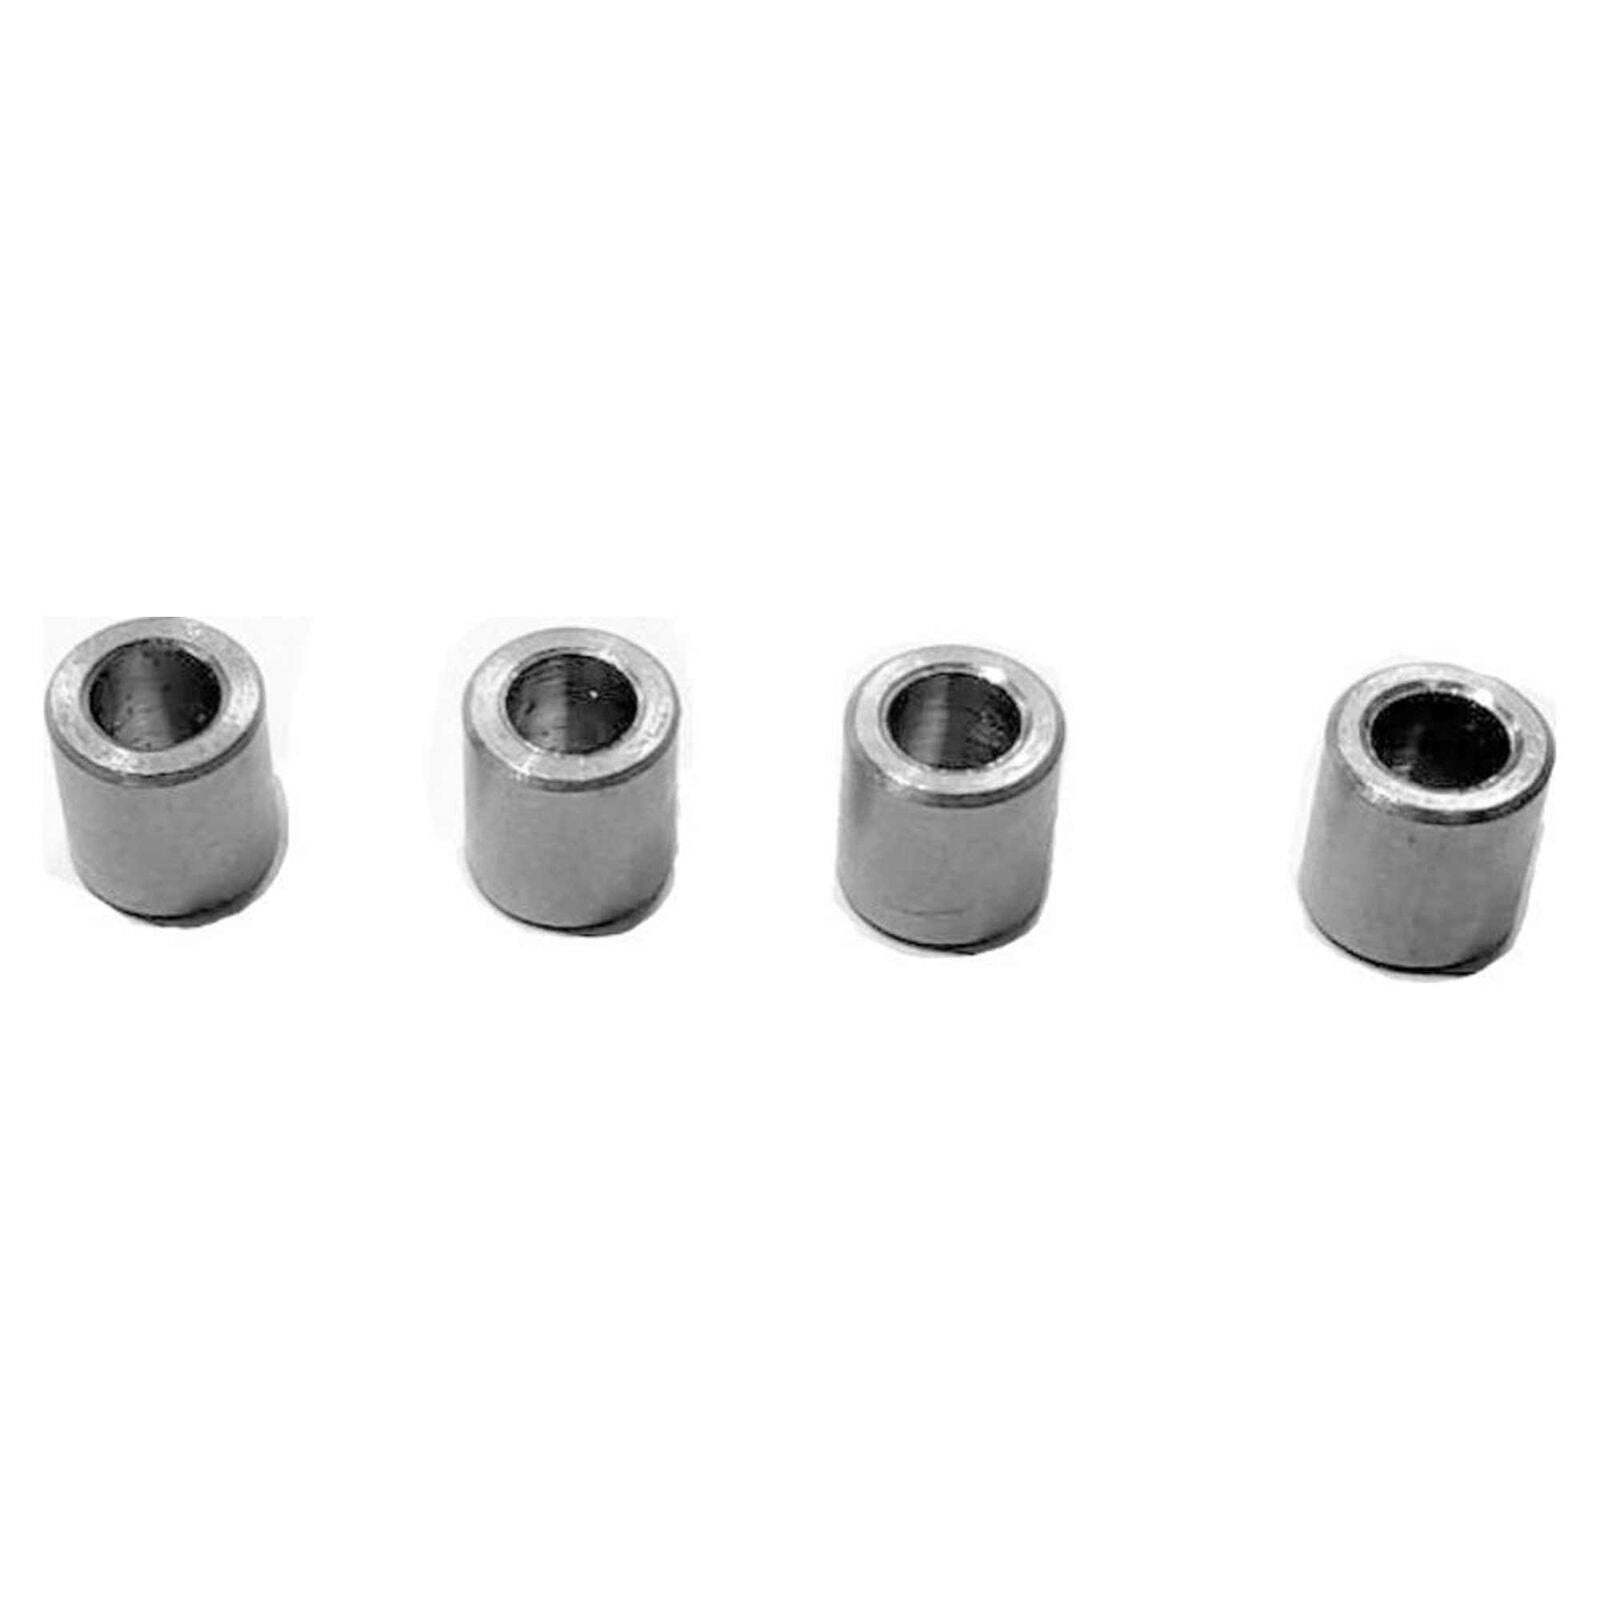 HOT RACING ATF48RB Stainless Steel Bell Crank Bushing